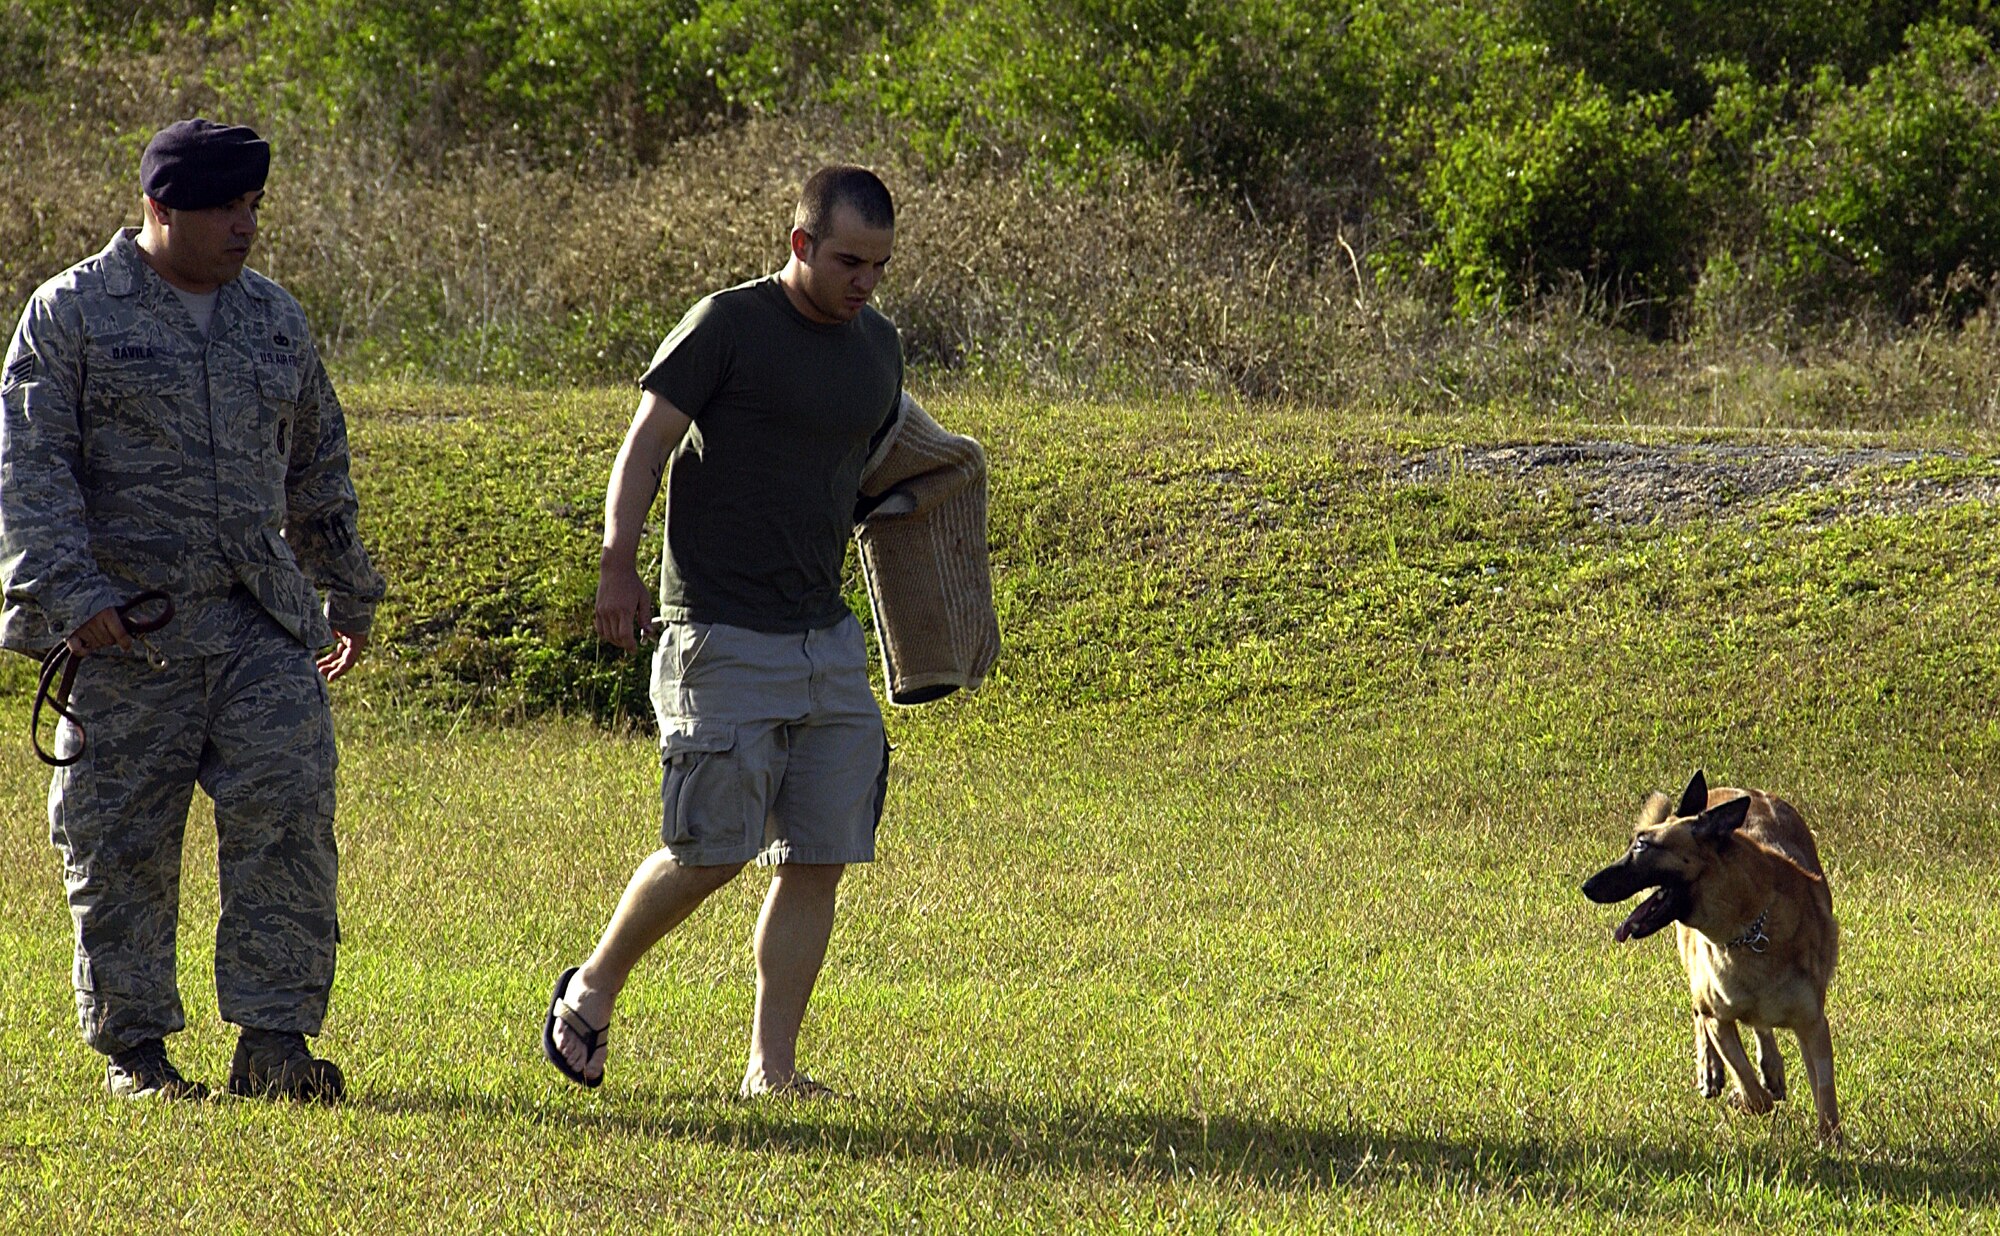 ANDERSEN AIR FORCE BASE, Guam -- Military working dog Cila guards as Staff Sgt. Jorge Davila, 36th SFS MWD handler,  escorts Airman 1st Class James Necessary, a 36th Security Forces patrolman acting as a perpetrator, to a vehicle during in a high-risk traffic stop scenario at a MWD competition held here Feb. 2. During the competition, military working dog teams faced a variety of scenarios designed to test their ability to work together and use their skills to accomplish the mission. (U.S. Air Force photo by Airman 1st Class Carissa Wolff)